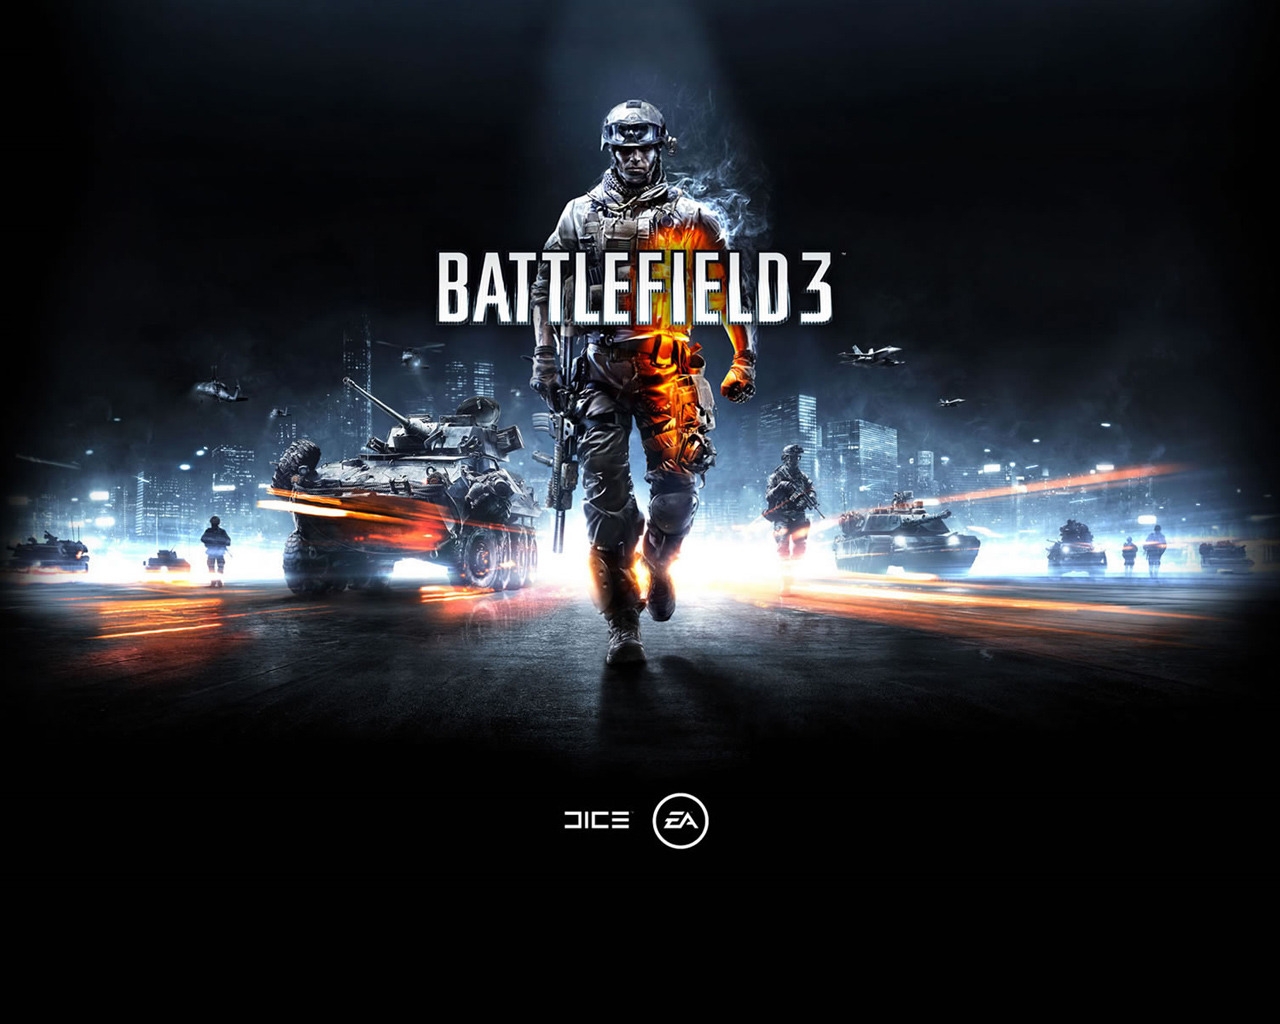 Battlefield 3 Game for 1280 x 1024 resolution